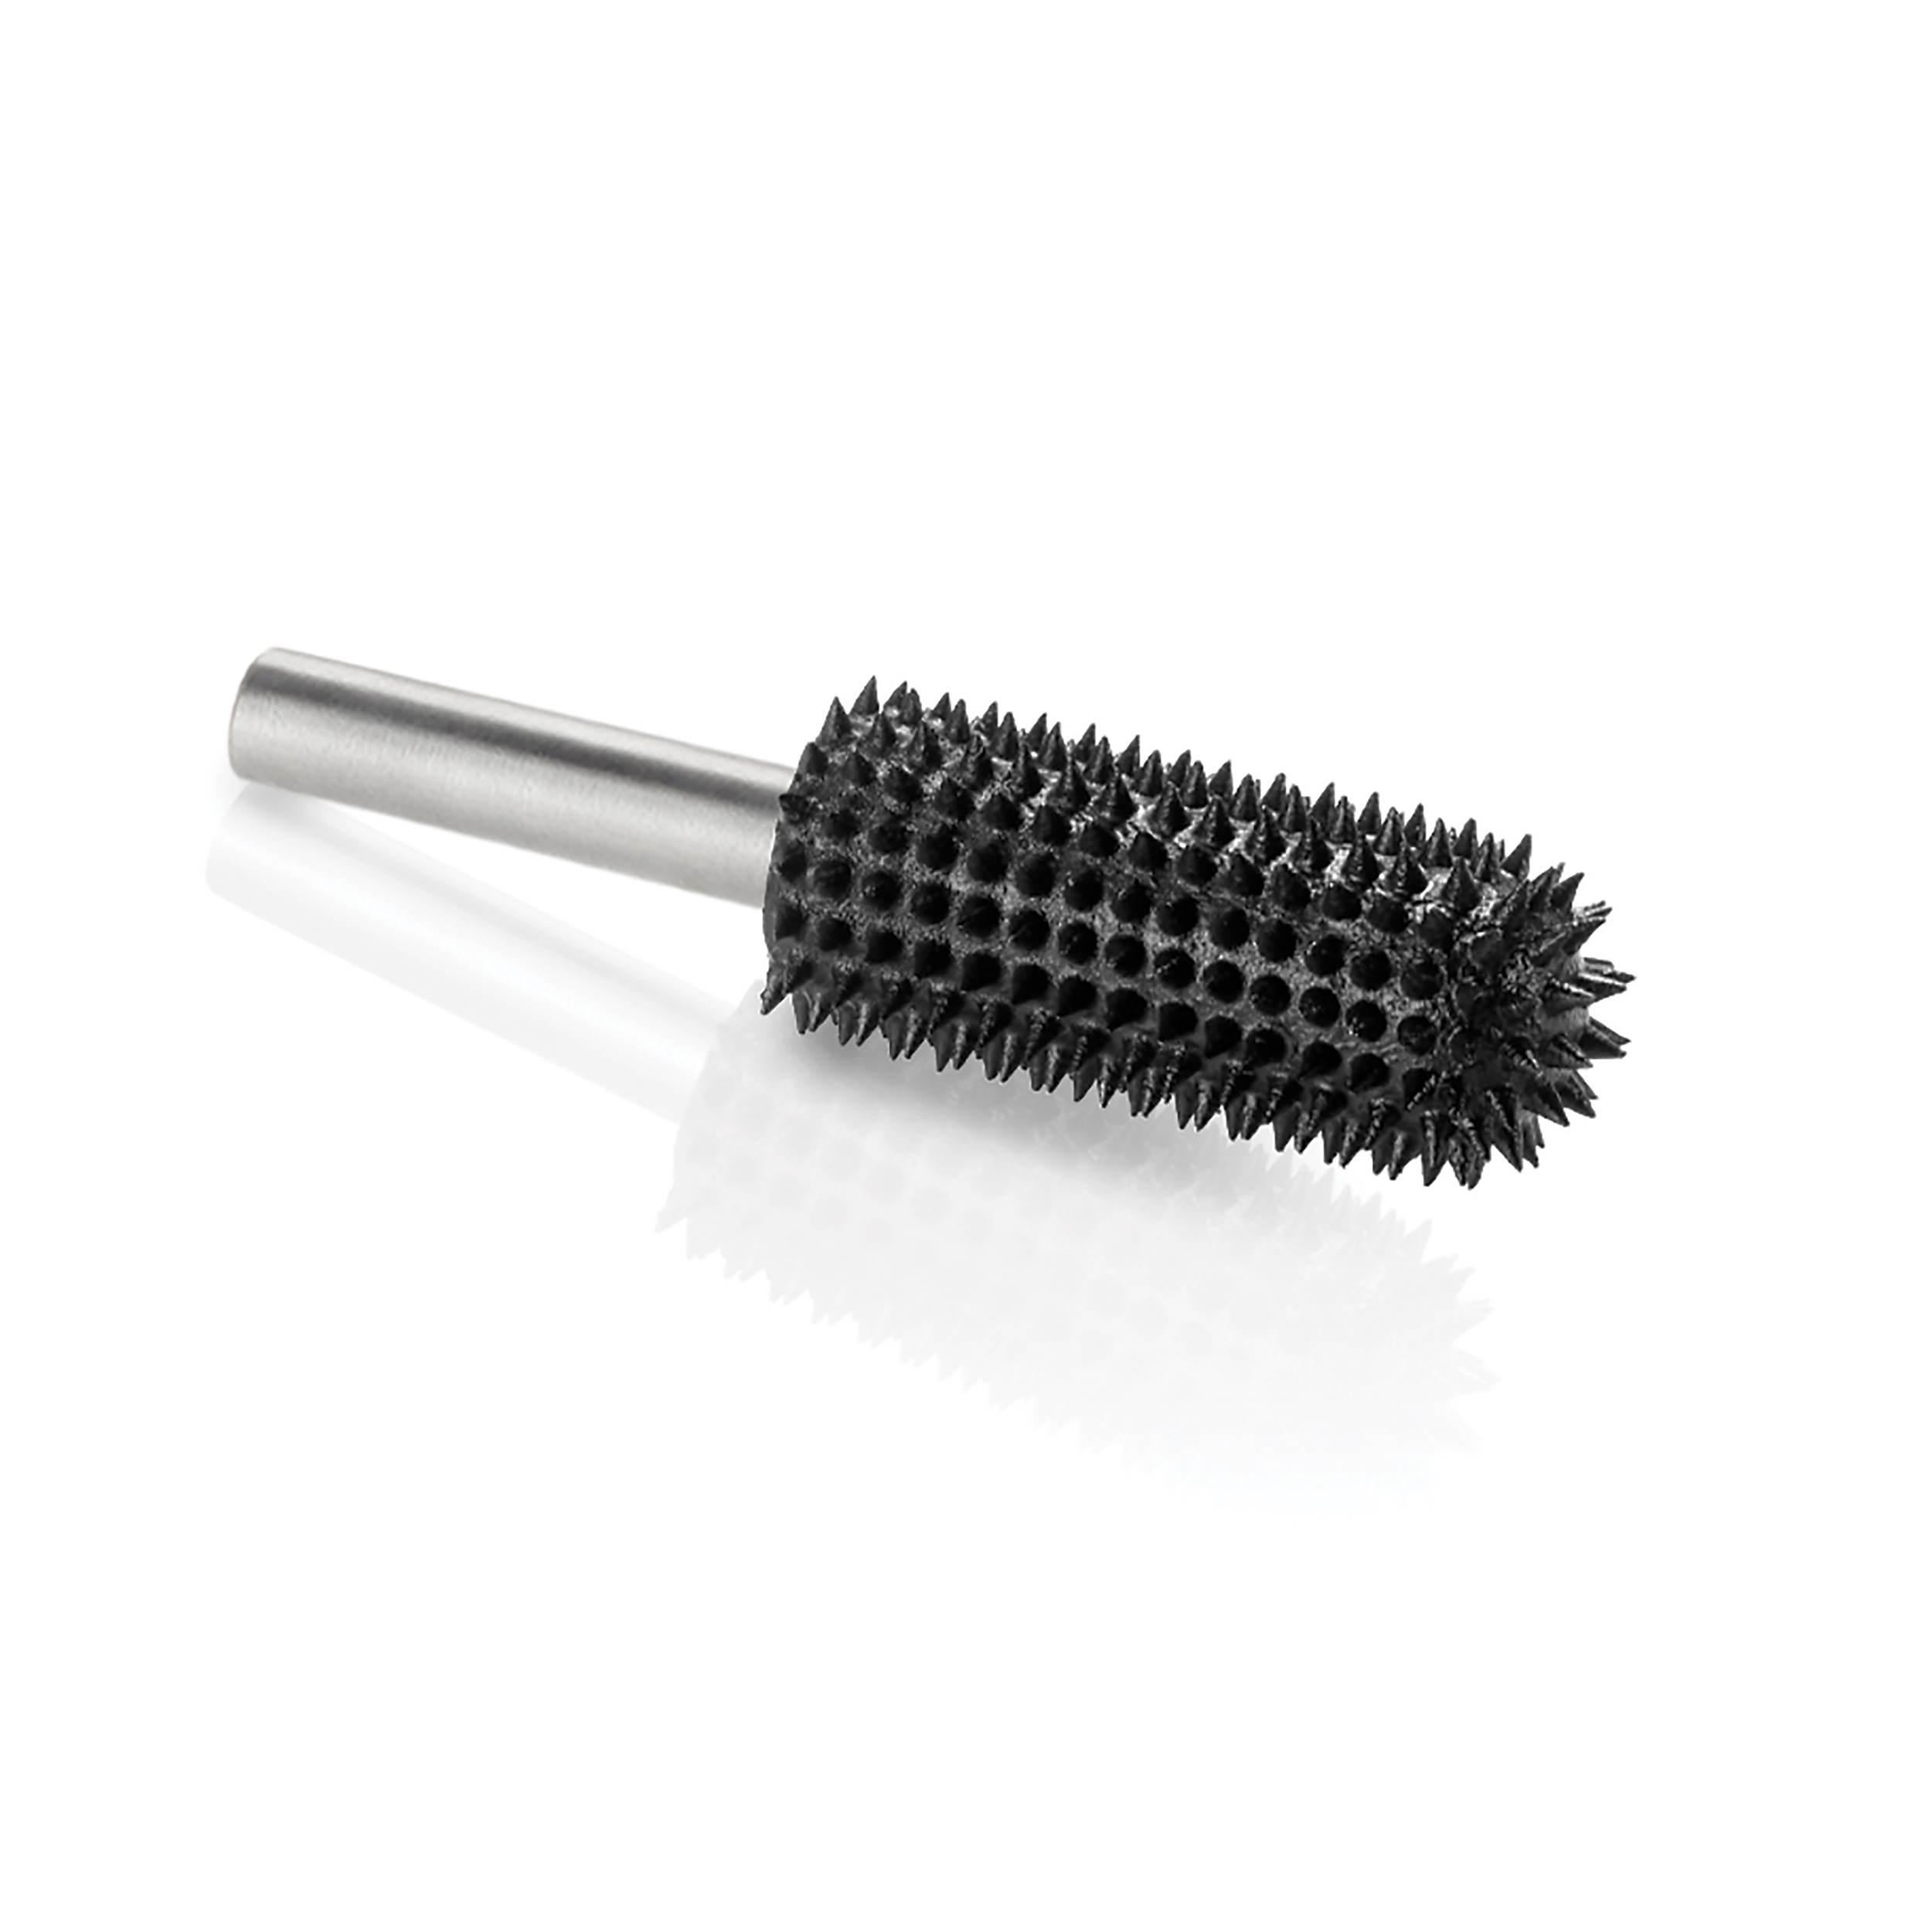 Extreme Ball Nose Burr, 1/4" Shaft, Very Coarse (1/2" X 1-1/2")